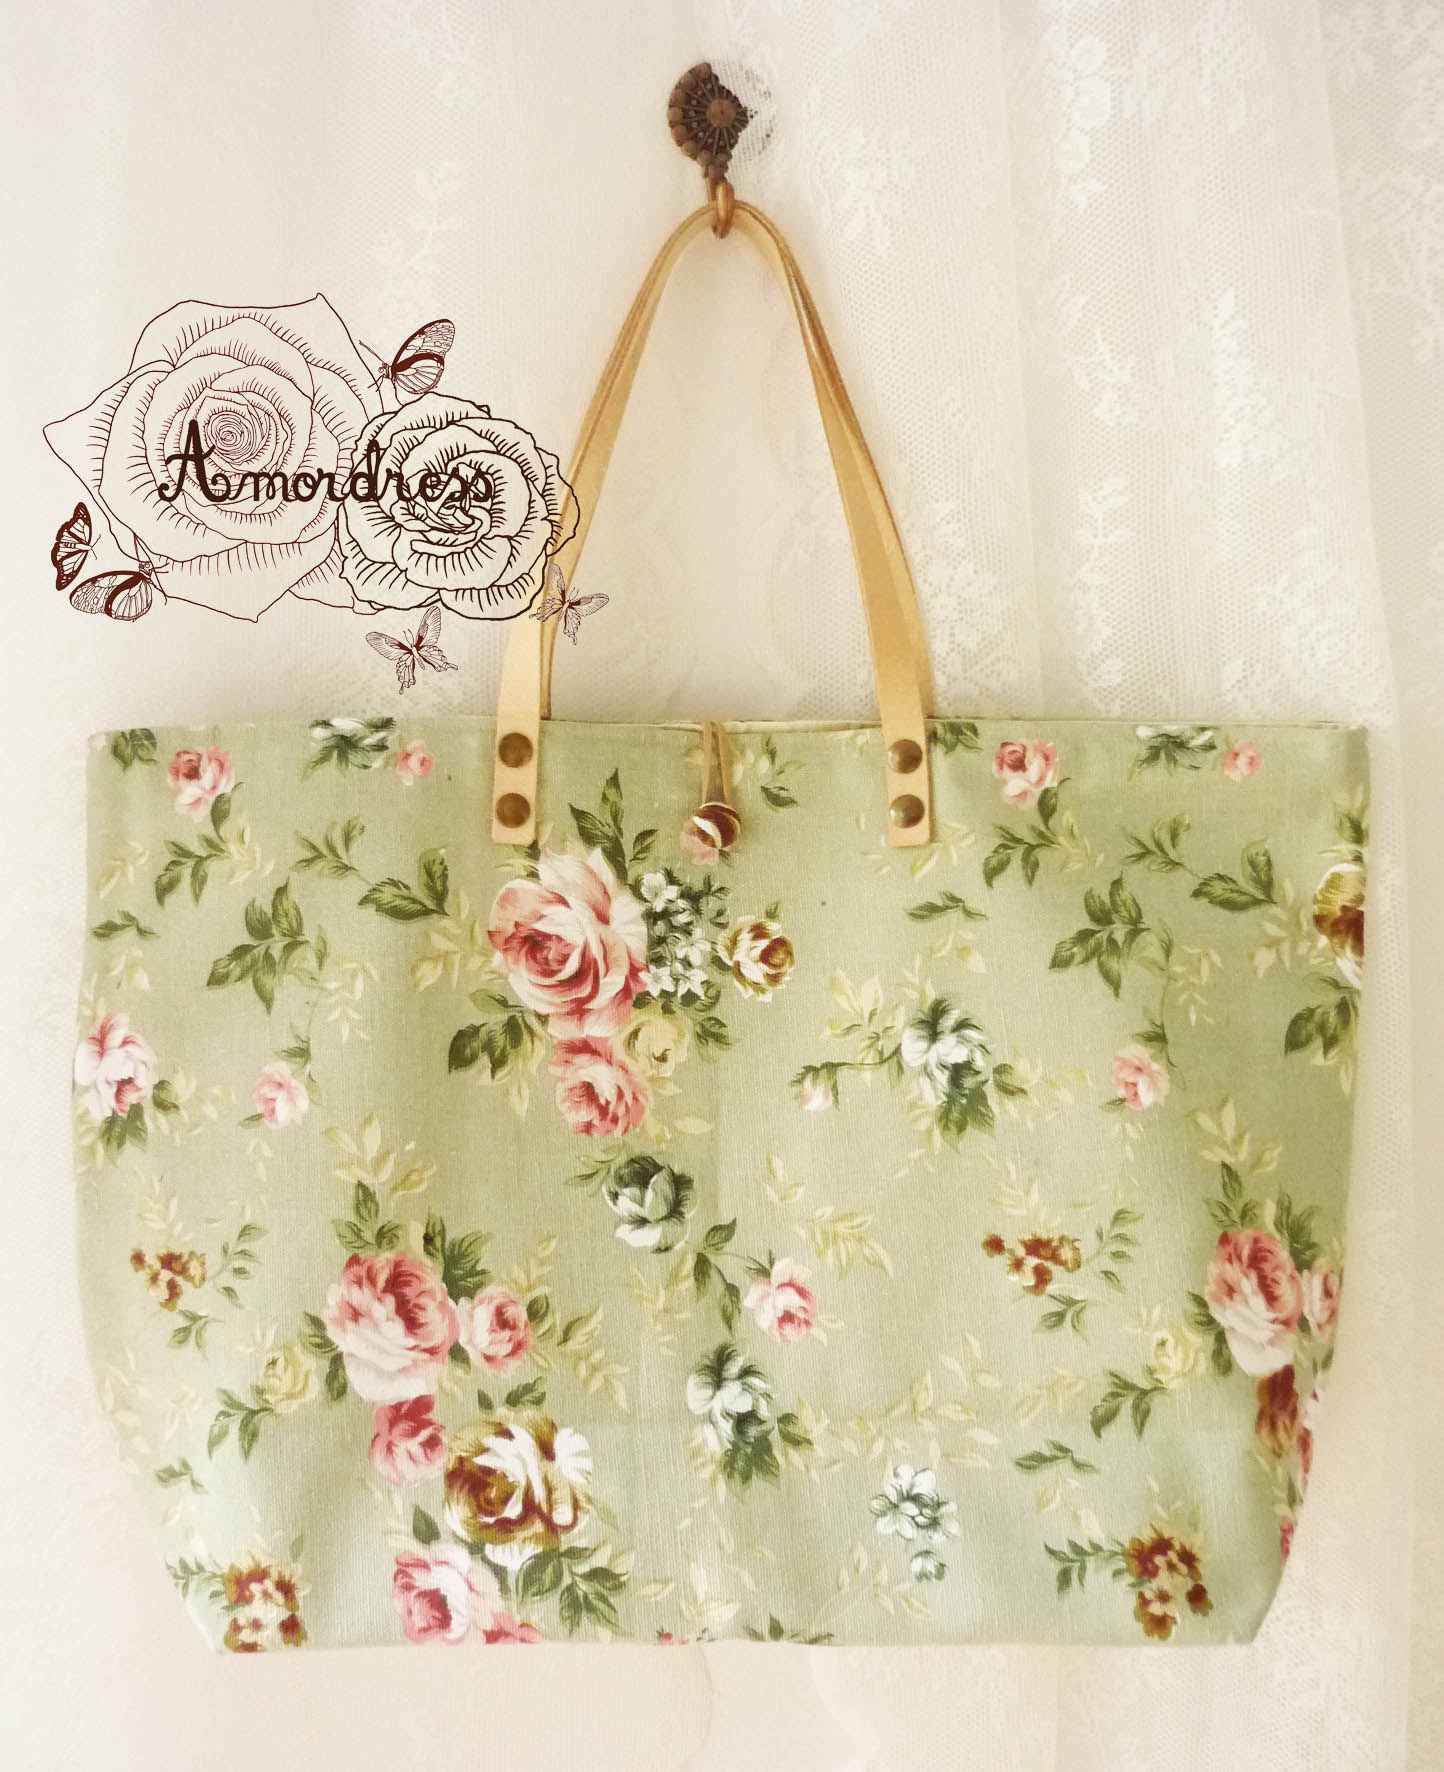 Floral Tote Bag Printed Canvas Bag Genuine Leather Strap Green With ...